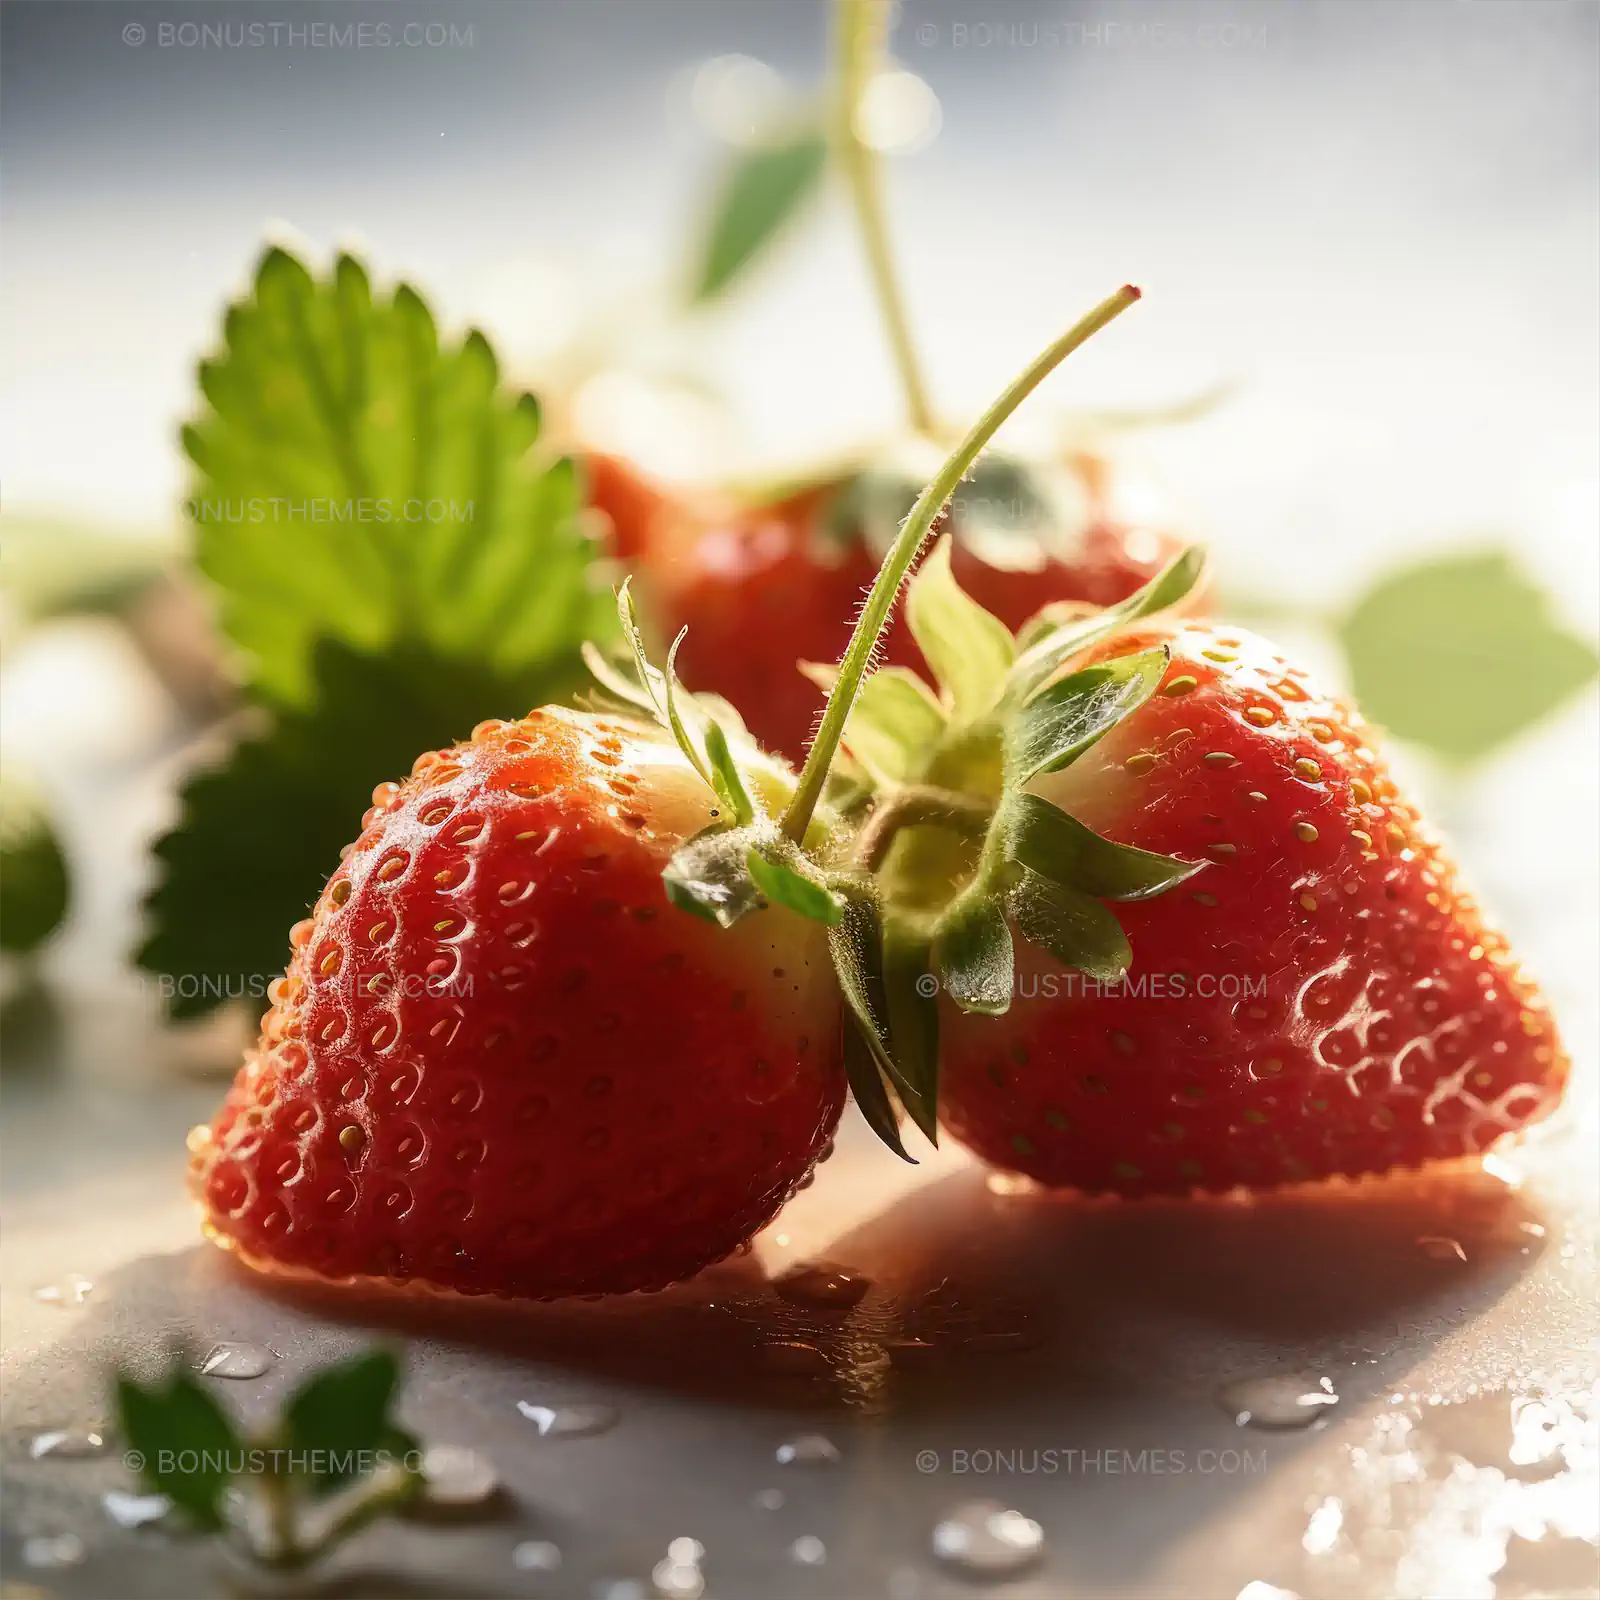 Three glistening strawberries, each one perfectly ripe, with delicate green leaves